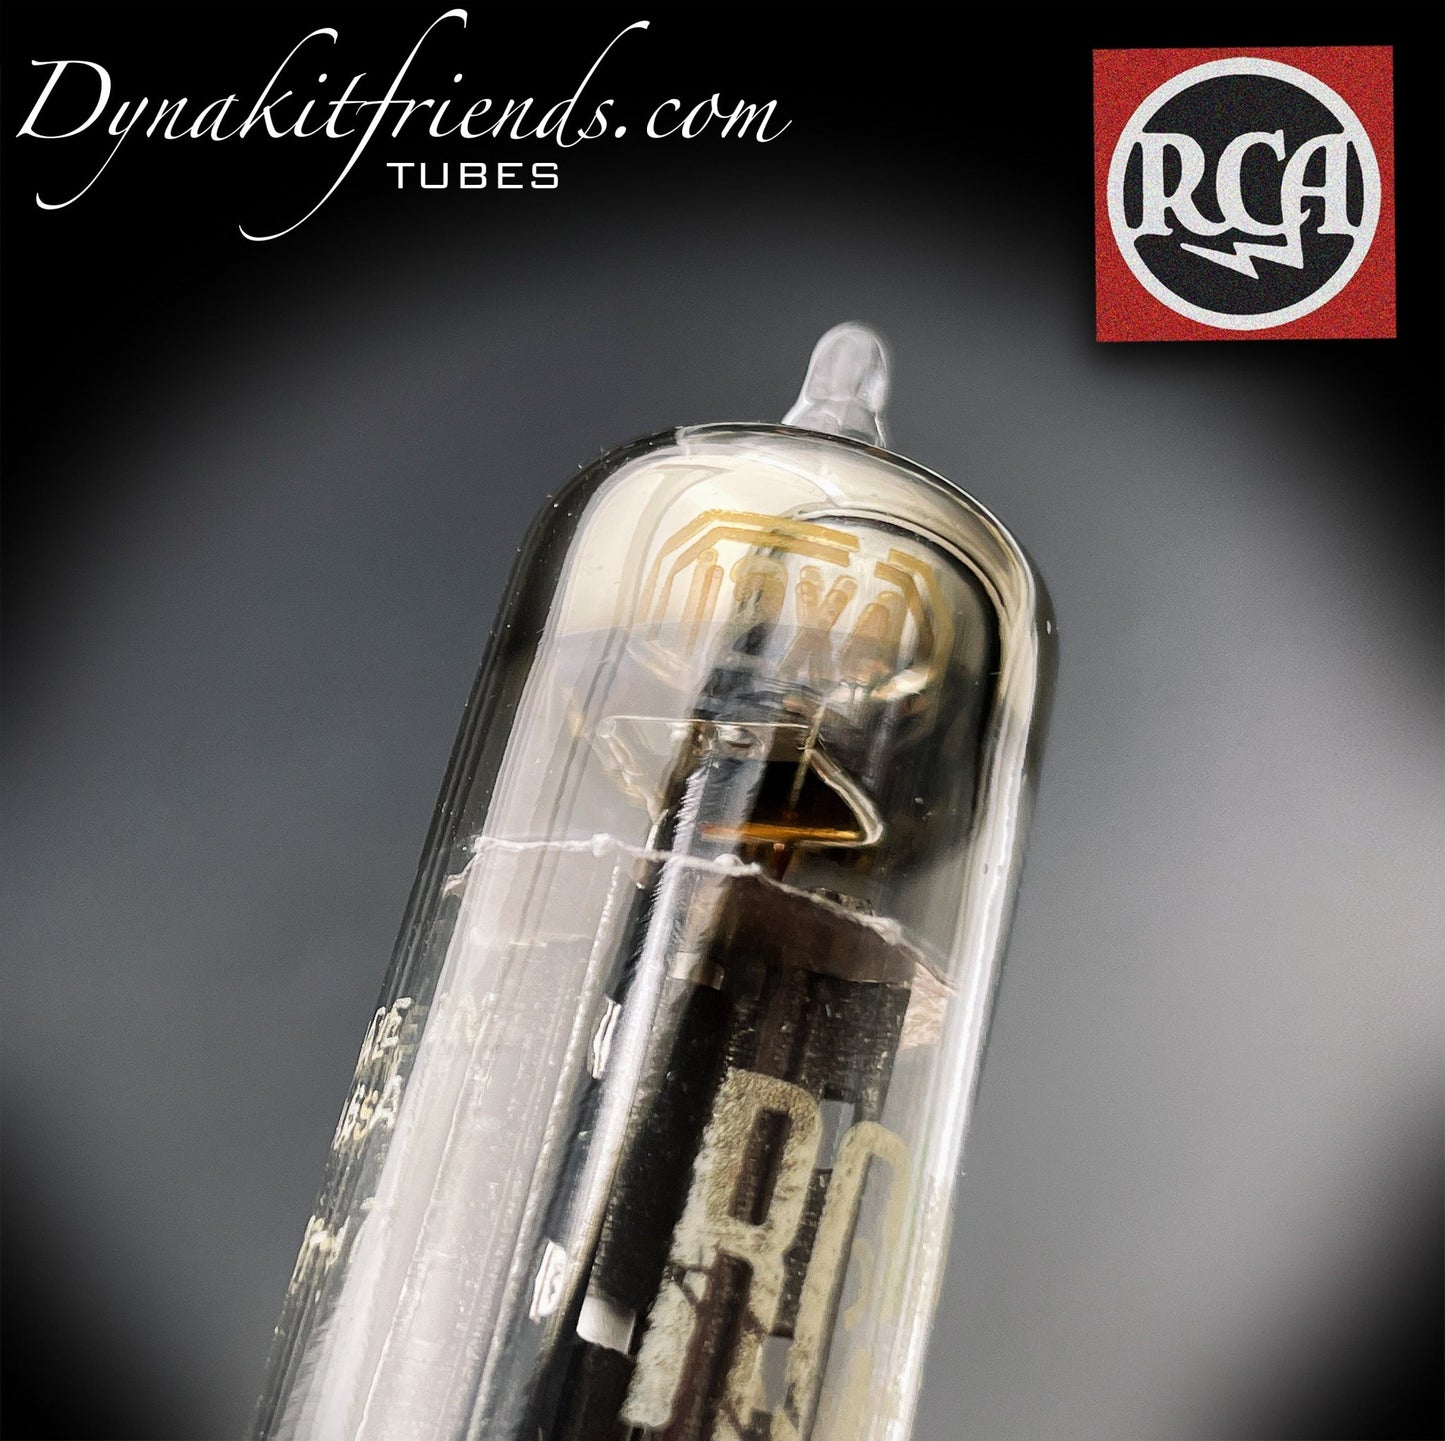 12X4 RCA @ Test NOS Black Plates [] Getter Tube Rectifier Made in USA '57 - Vacuum Tubes Treasures